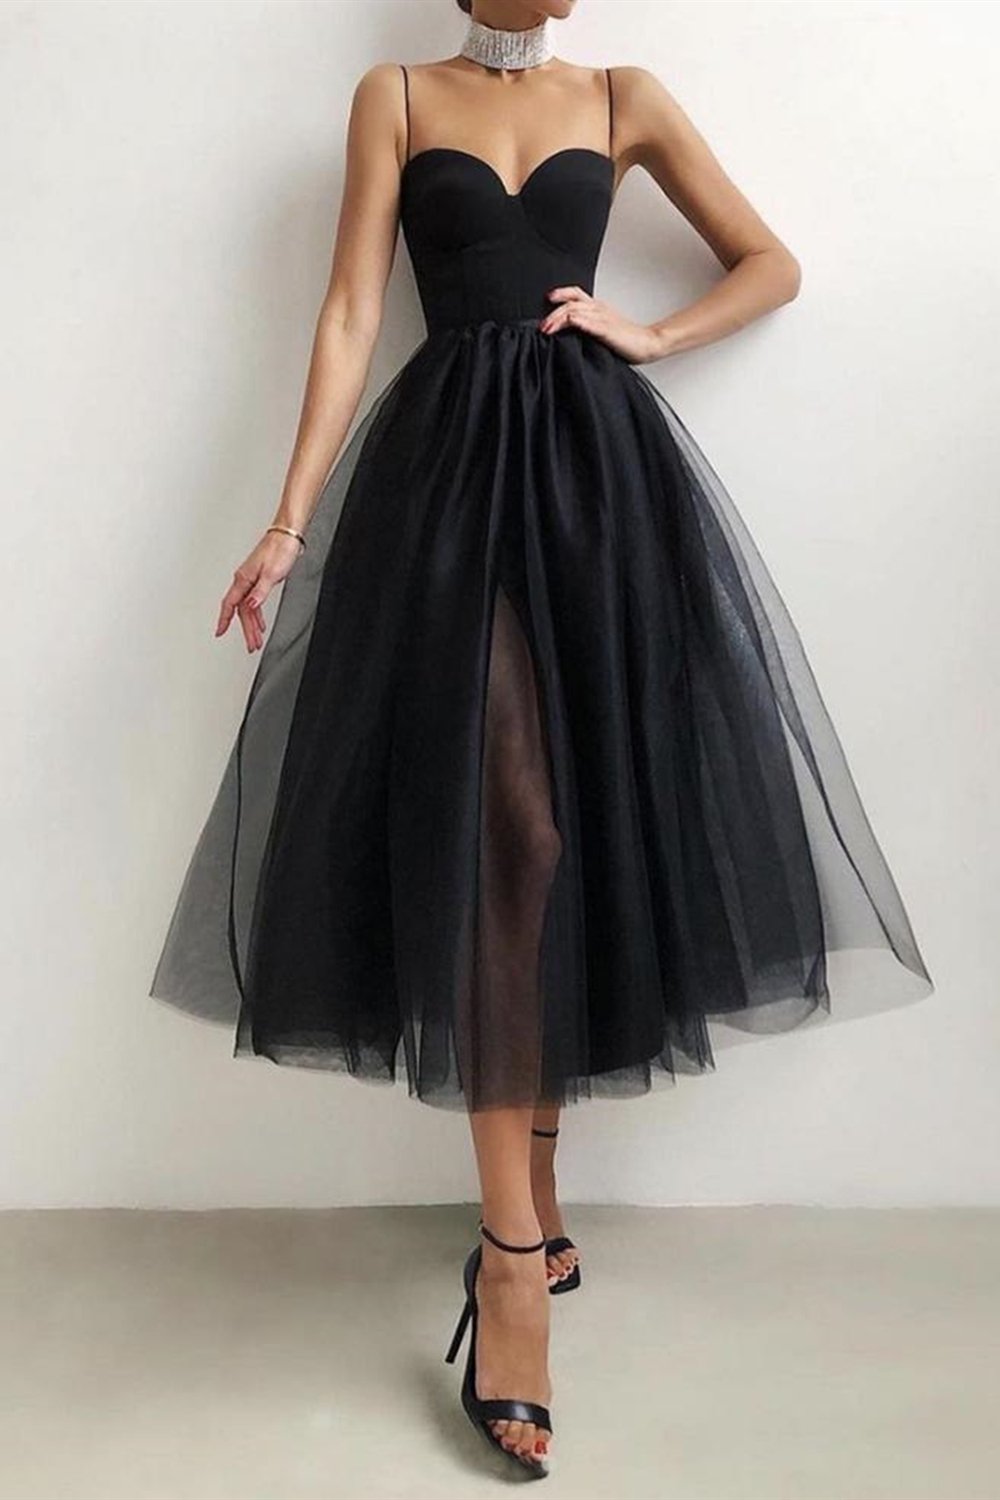 Tea Length Prom Dress Black/White Formal Evening Homecoming Dress with Slit Sexy